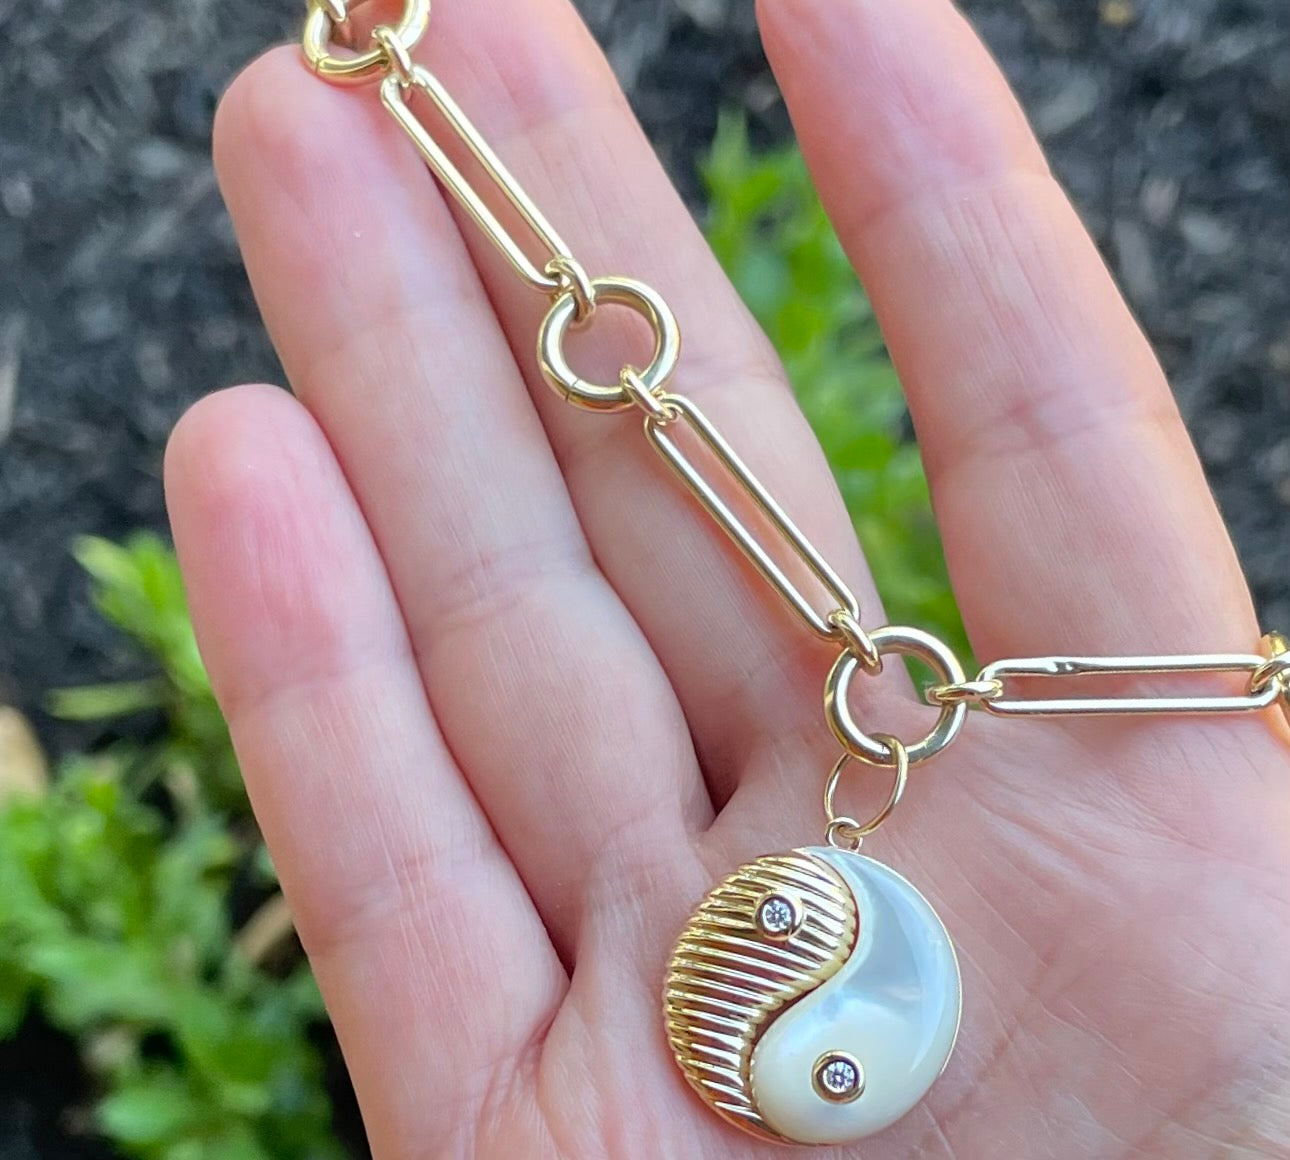 This beautiful yin and yang pendant is a symbol of harmony and balance. 